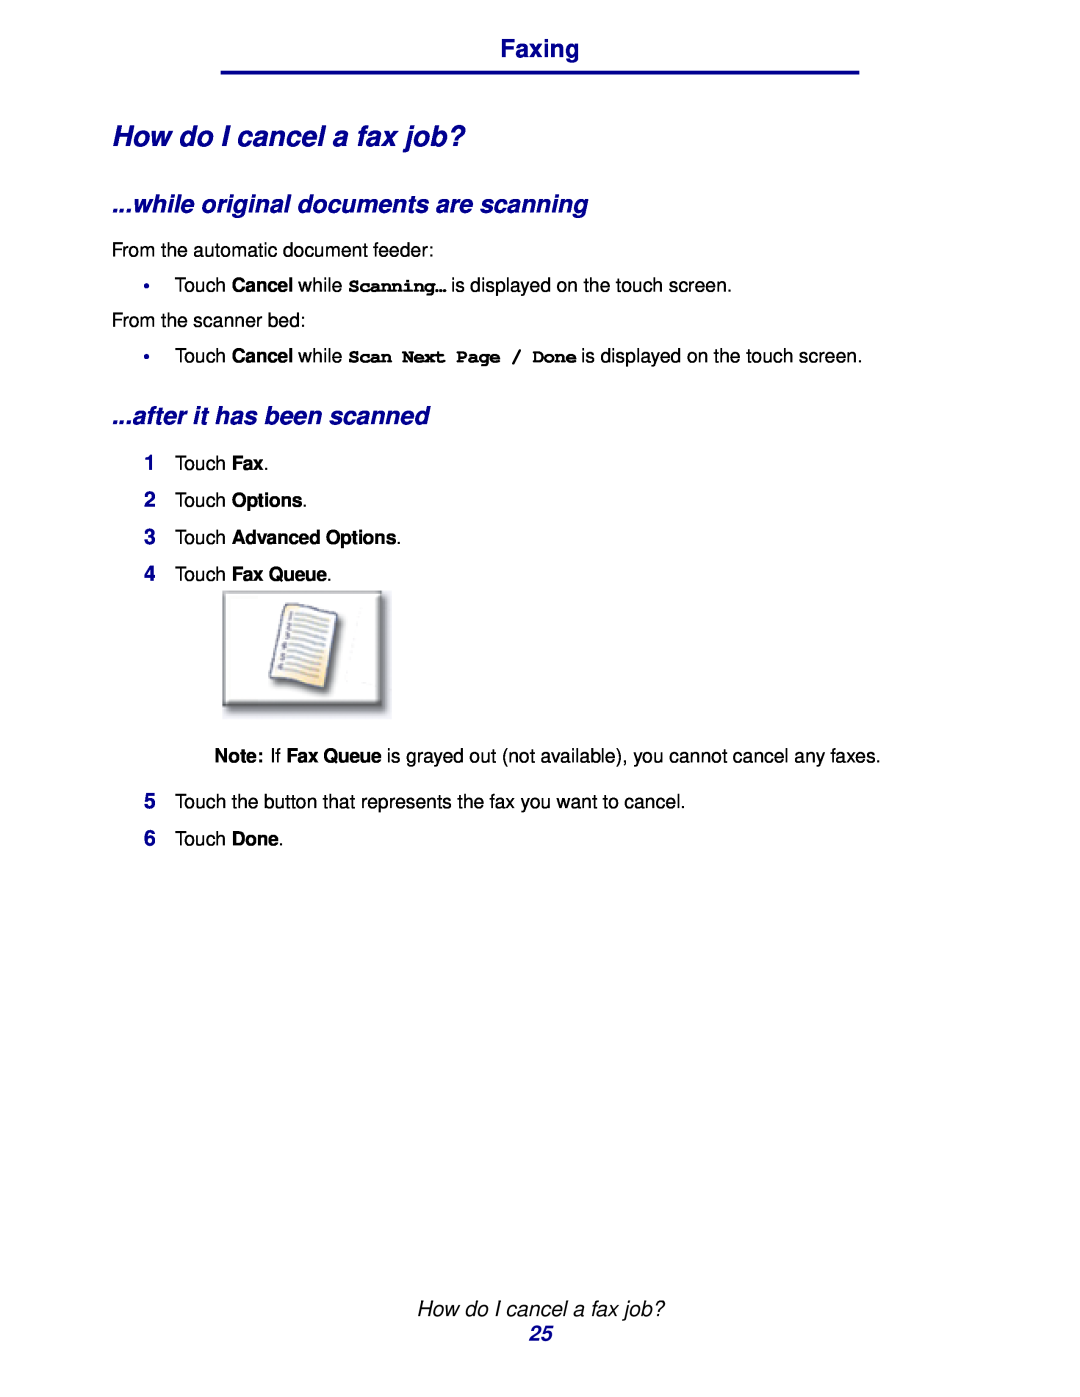 IBM MFP 30, MFP 35 How do I cancel a fax job?, while original documents are scanning, after it has been scanned, Faxing 